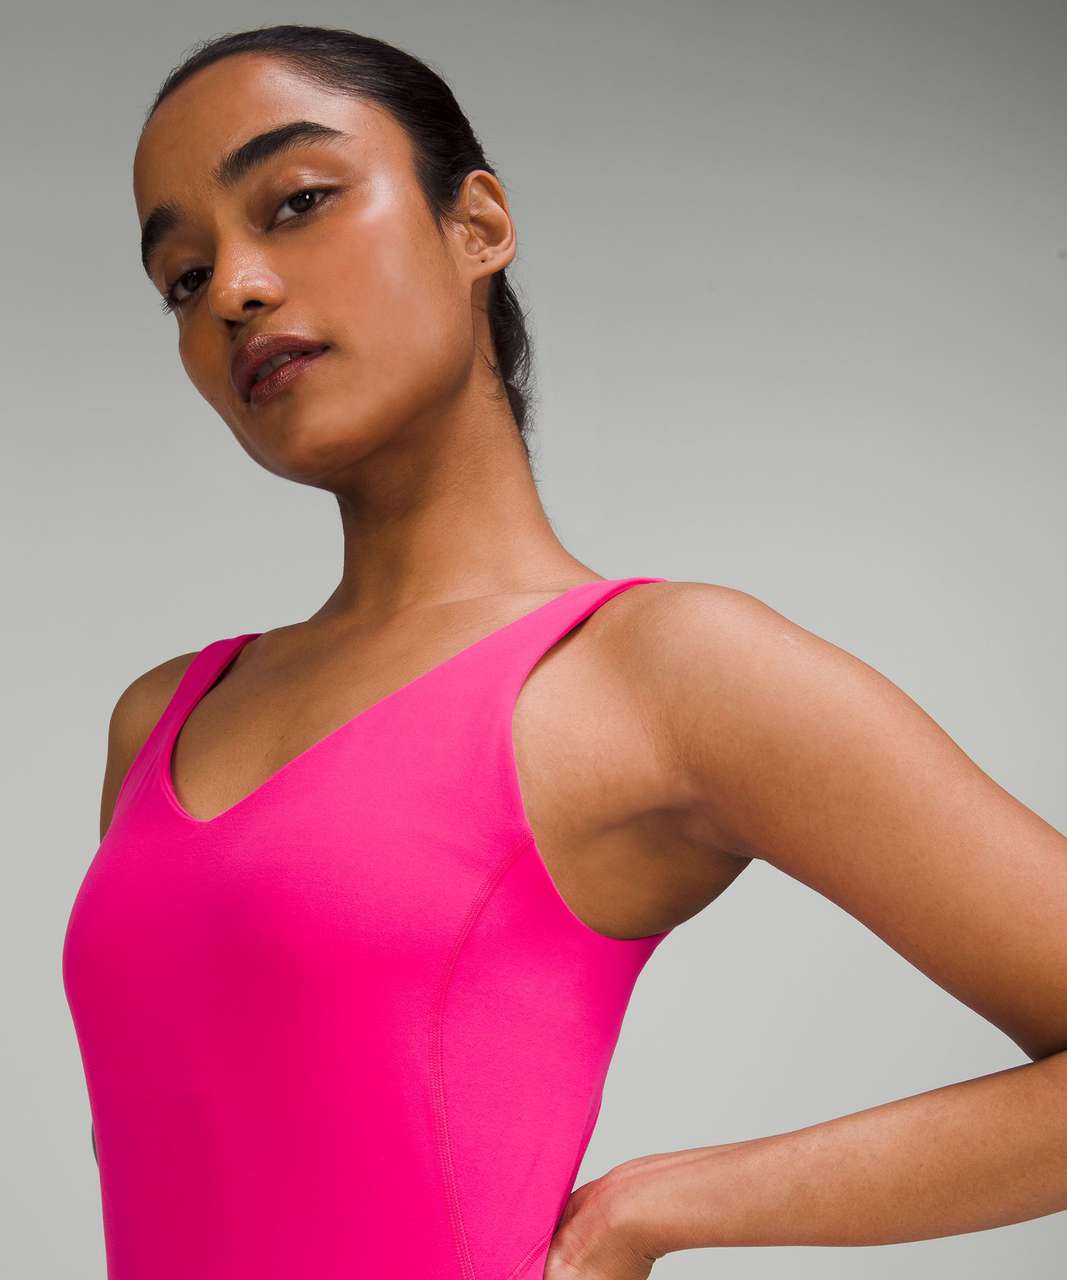 Announcement: we have the lululemon Align Bodysuit 8 and the Court Crush  Dress. Thank you for your time. #lululemon #alignbodysuit #cou